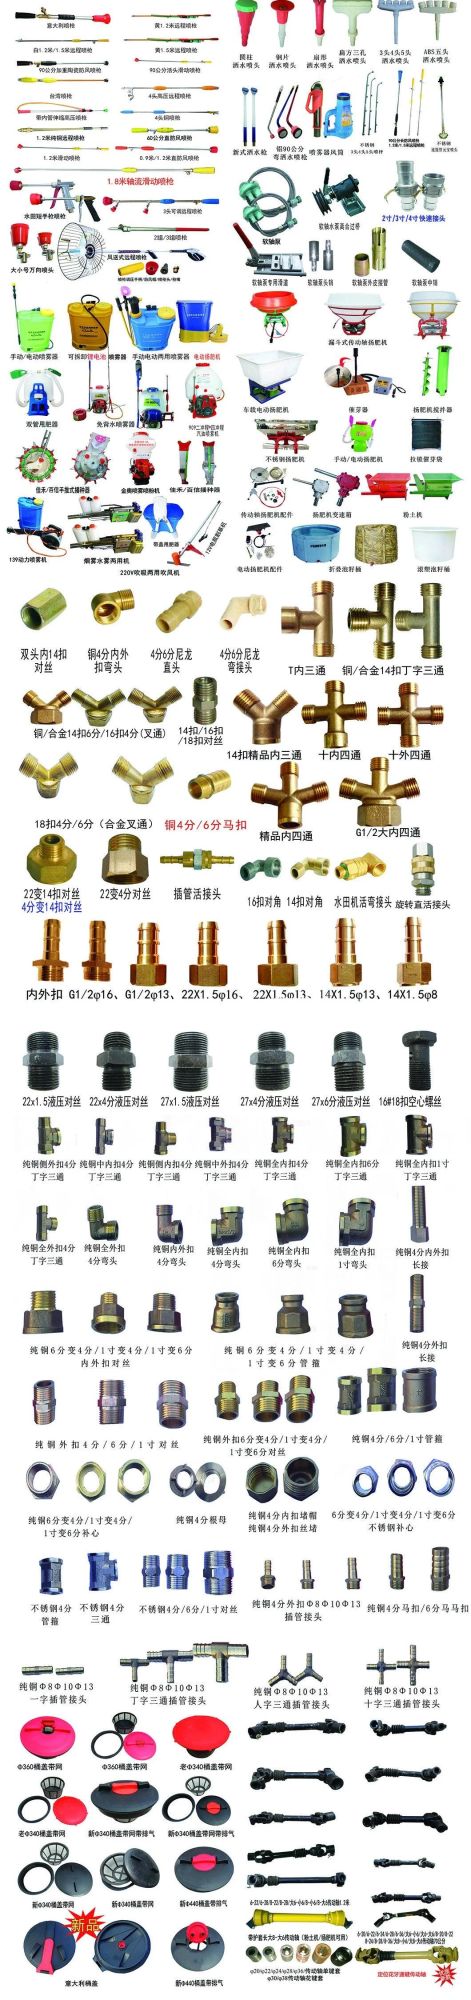 Pressure Stainless Steel Pesticide Plastic Jet Teejet Hypro Txvk Agricultural Machinery Nozzle